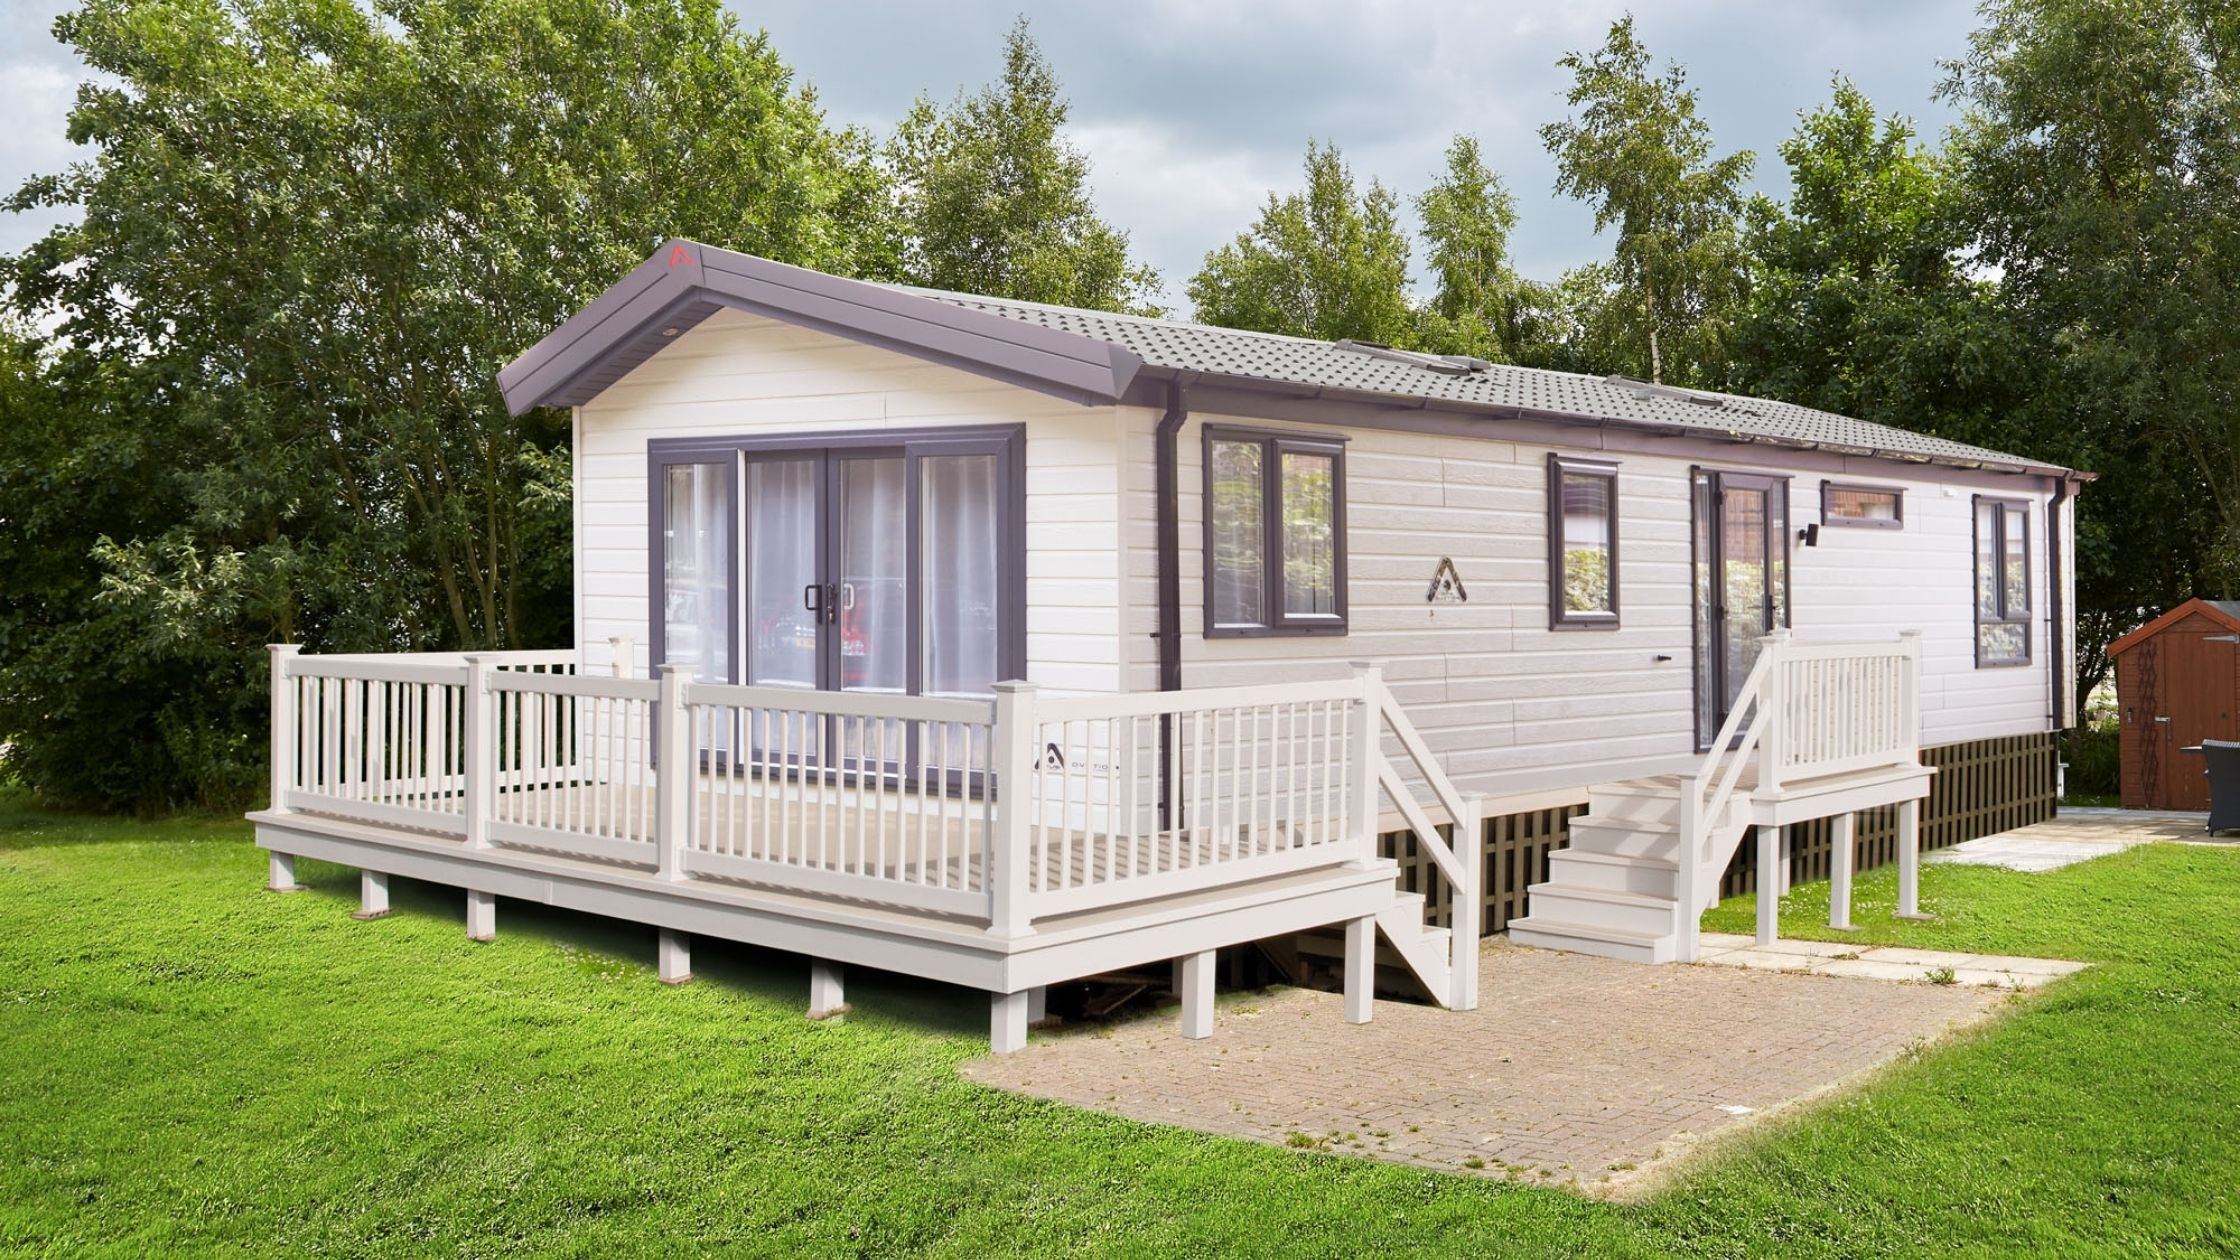 How to Reduce Moisture in a Static Caravan